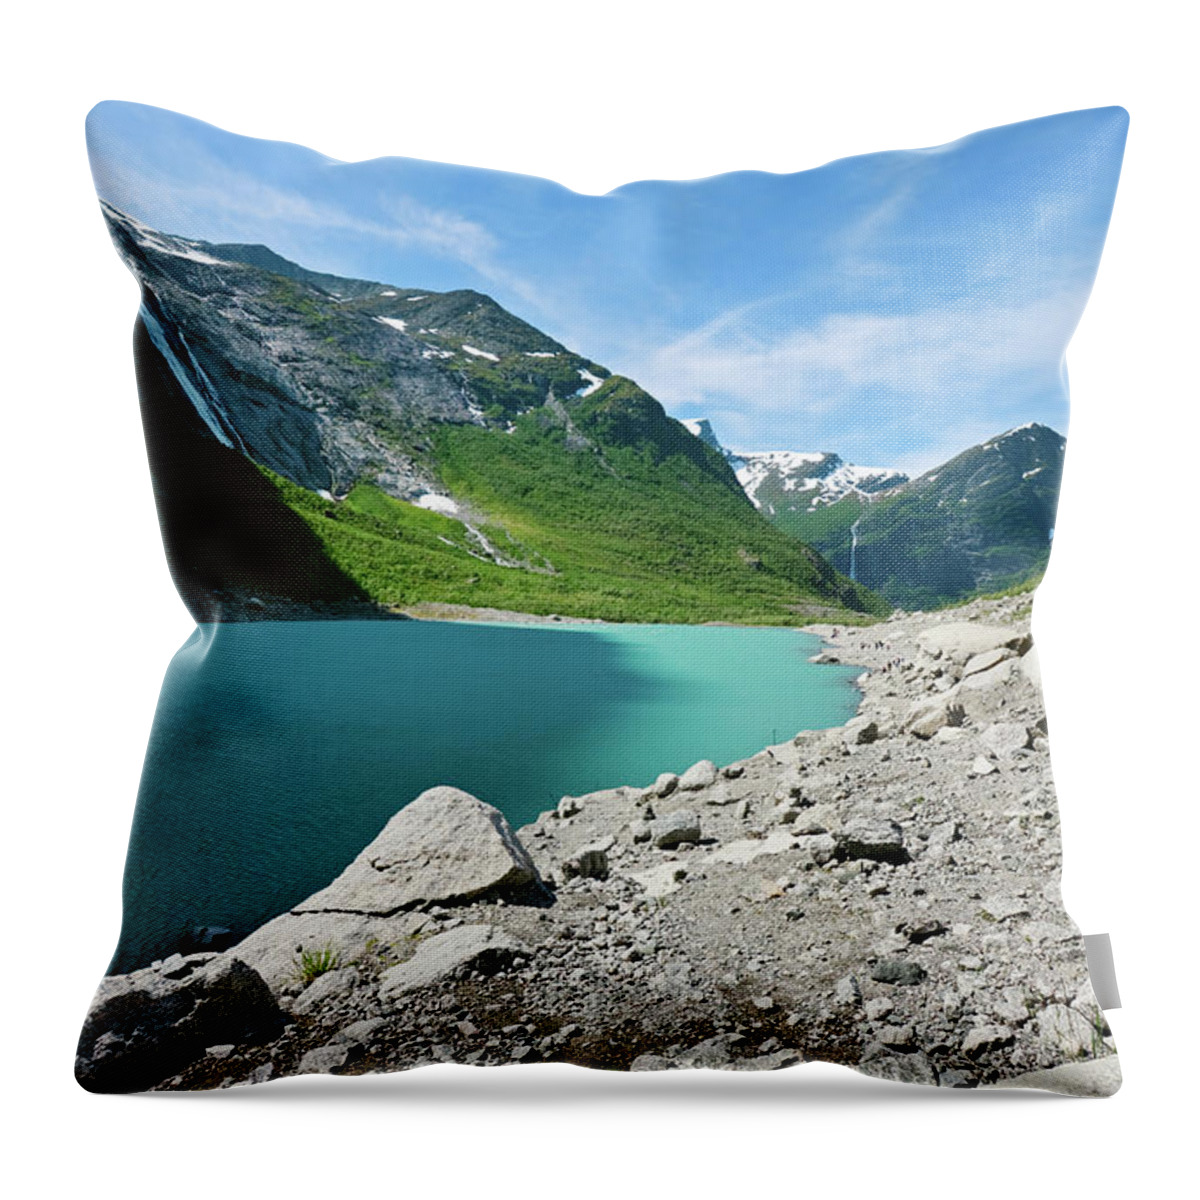 Scenics Throw Pillow featuring the photograph Briksdal Glacier Lake, Norway by Rusm